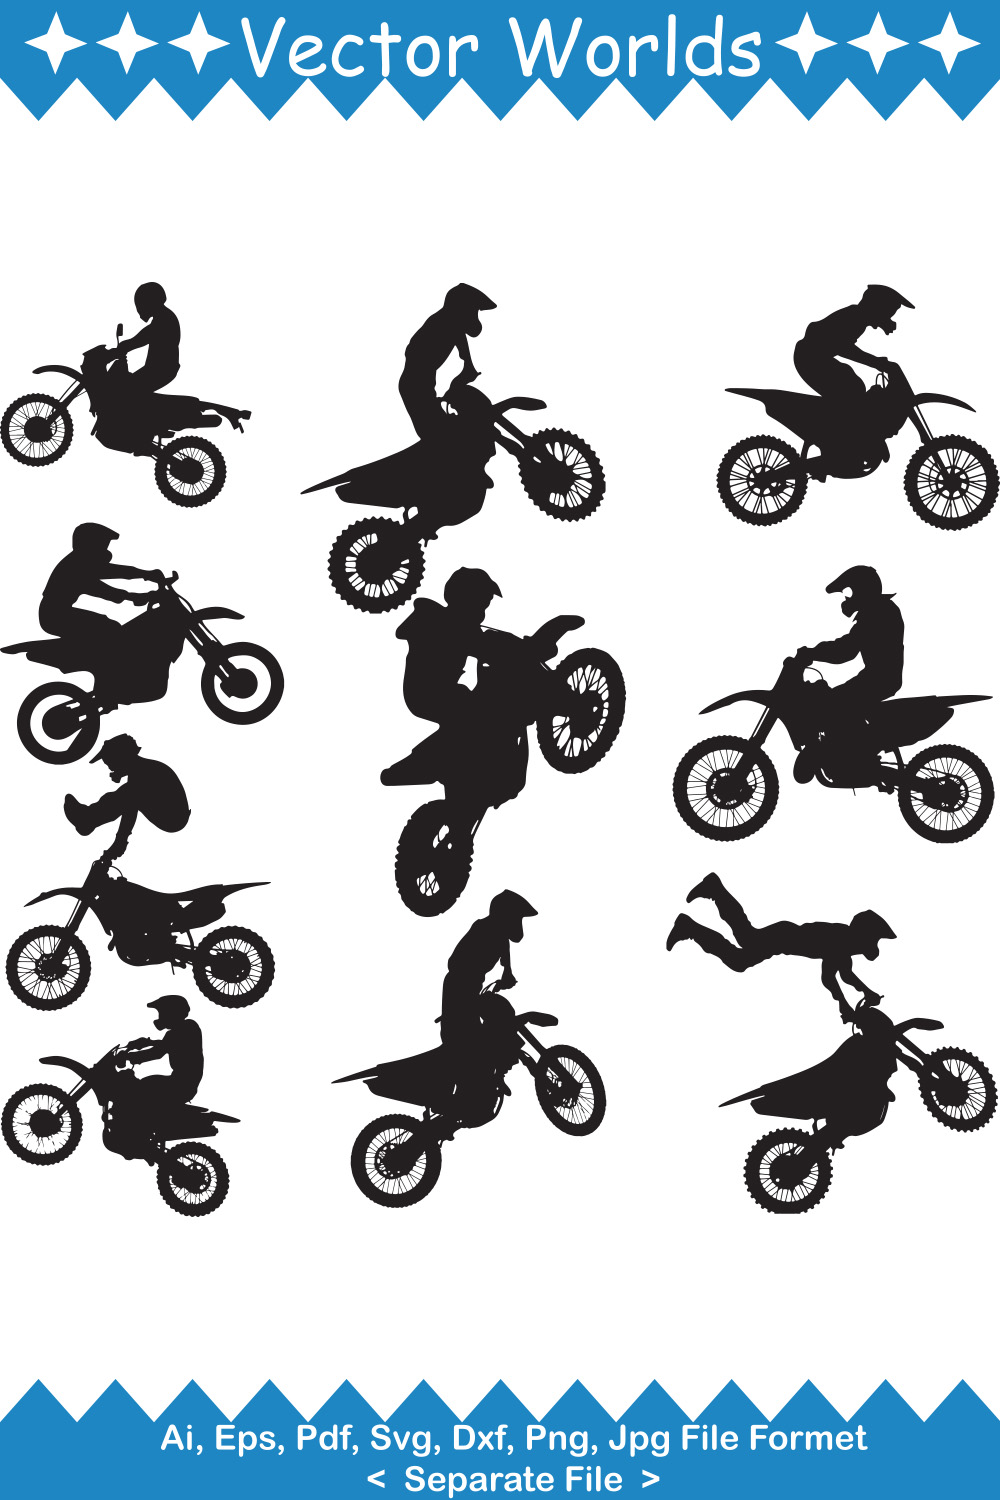 A selection of adorable images of Dirt Bikes silhouettes